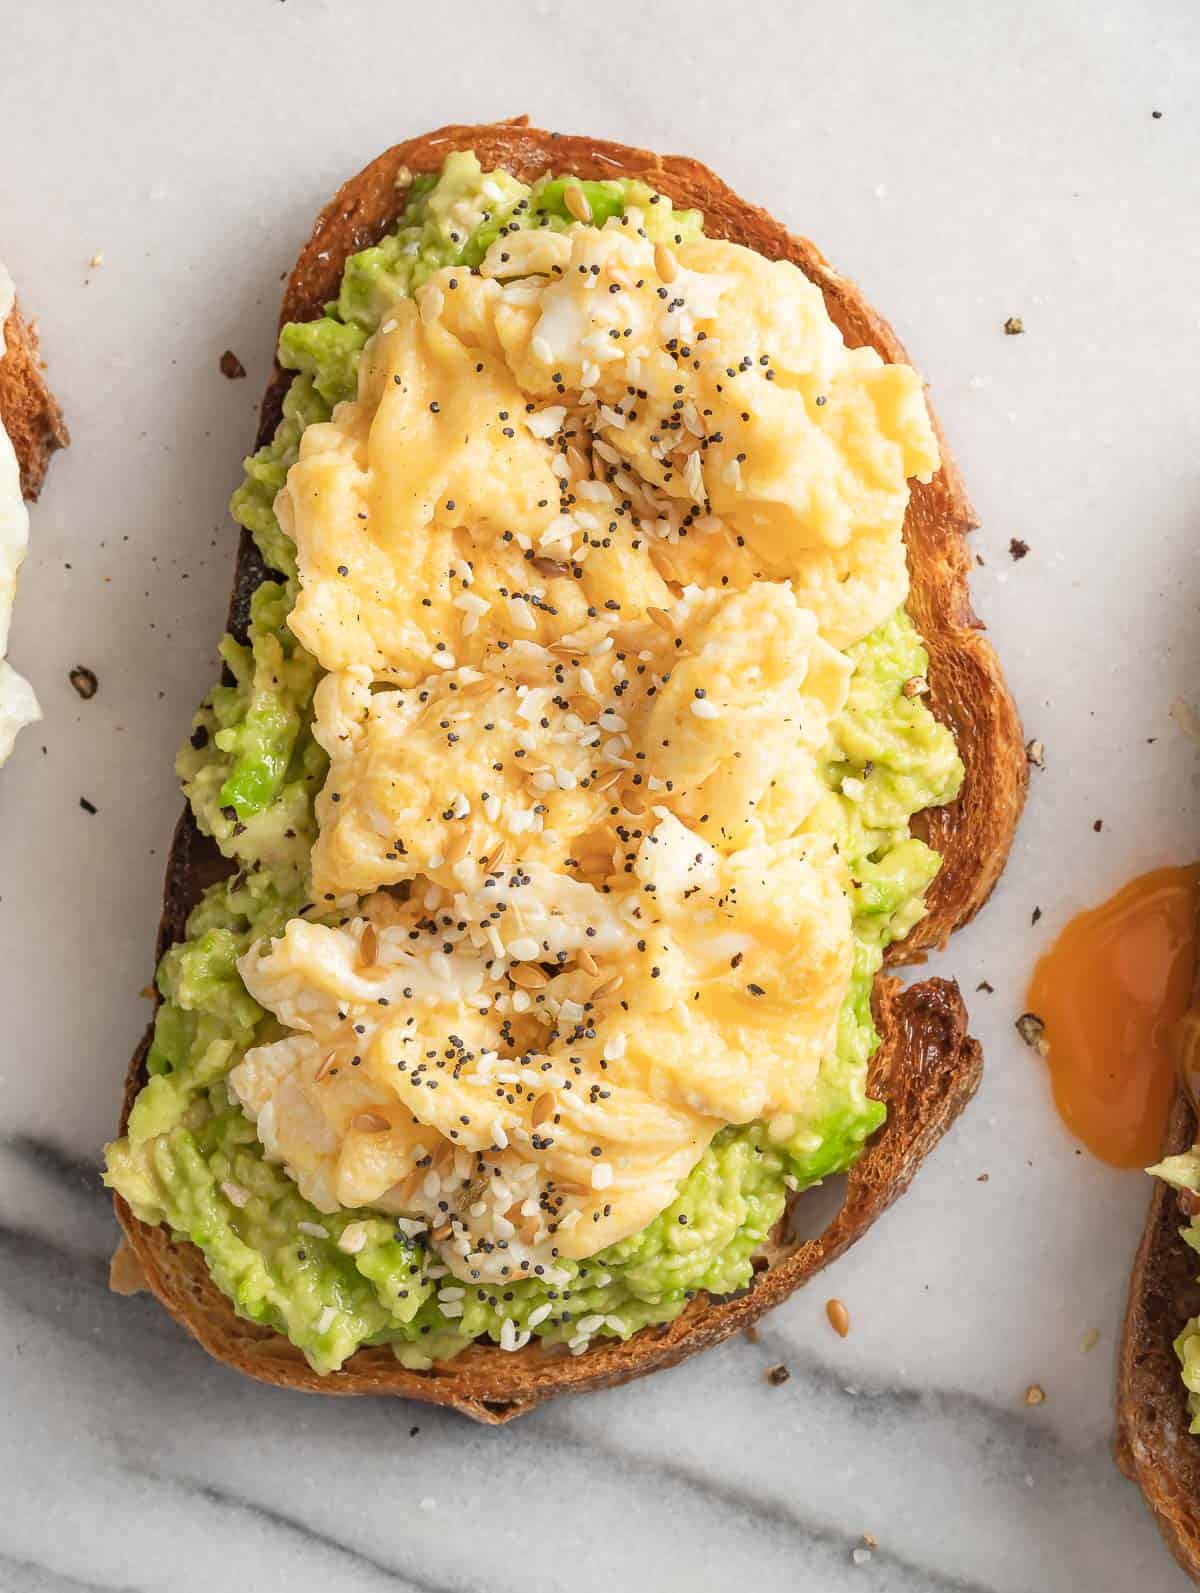 Avocado on toast bread topped with scrambled egg